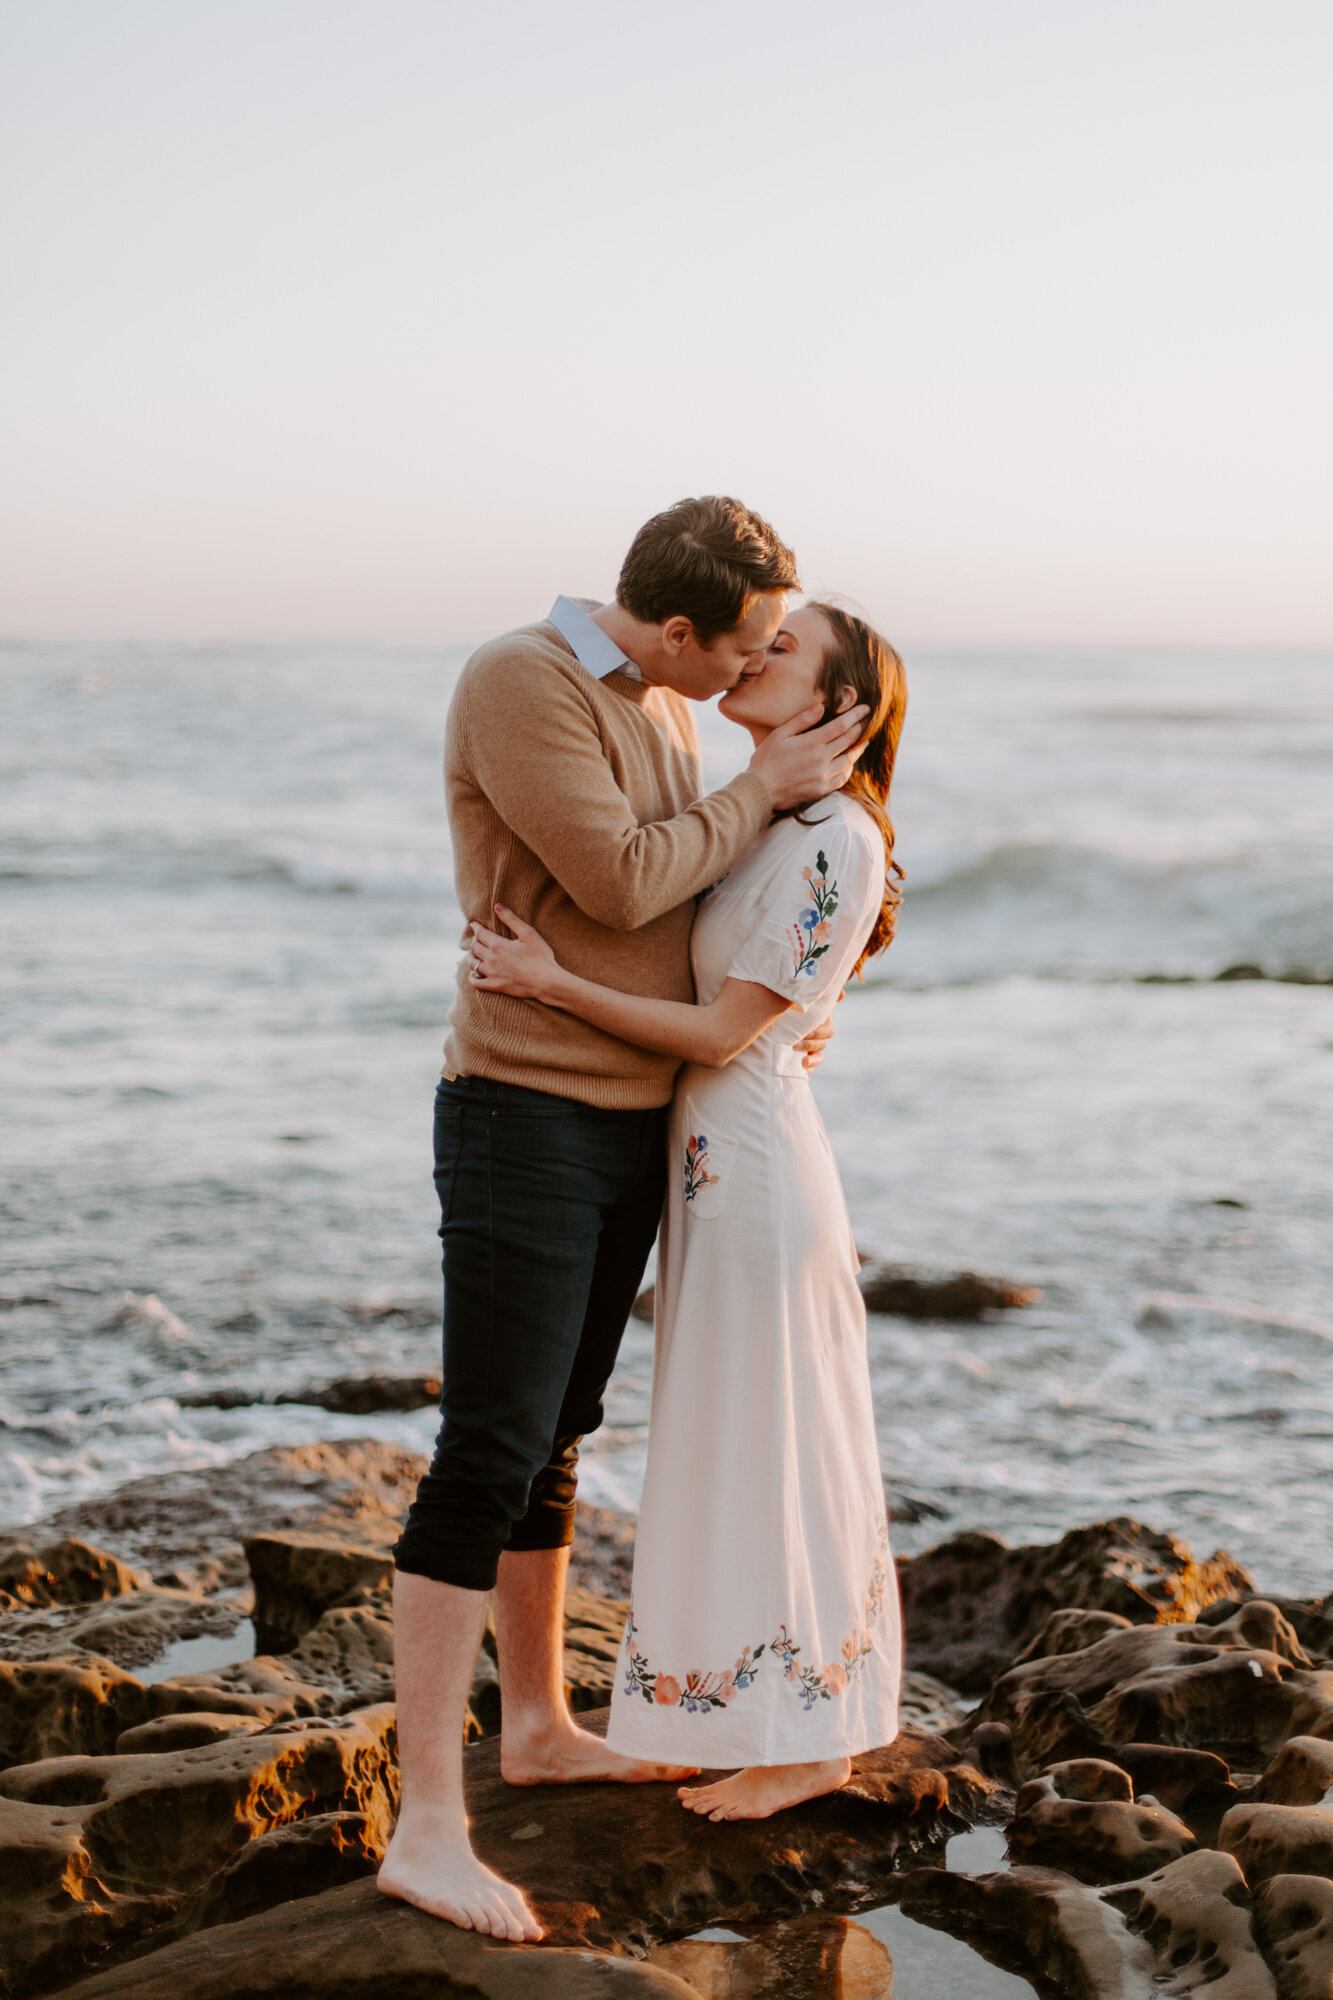 La Jolla Engagement Photos in San Diego with beach cliff and tide pools and on the sand.  Wore a white floral dress and took their engagement photos for their wedding by Kara Reynolds photography